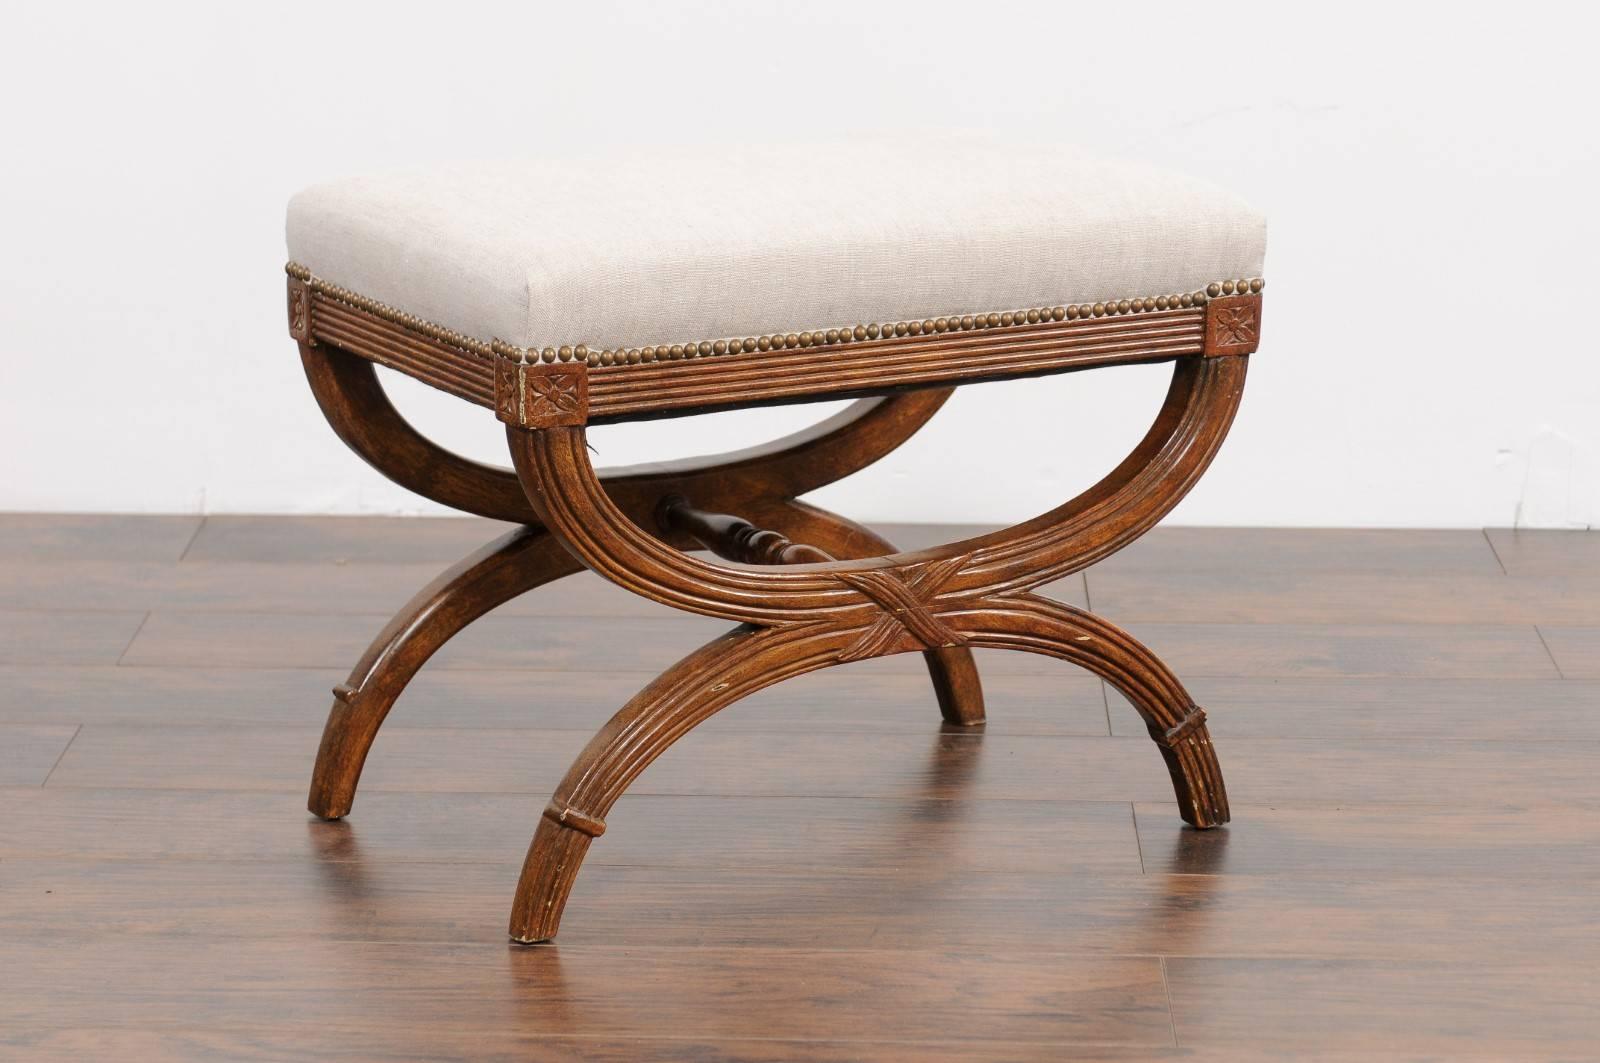 An Italian vintage neoclassical style carved and grain painted X-form stool from the mid-20th century with new upholstered seat. This Italian stool features a rectangular seat, upholstered in a simple linen fabric, accented with a brass nailhead